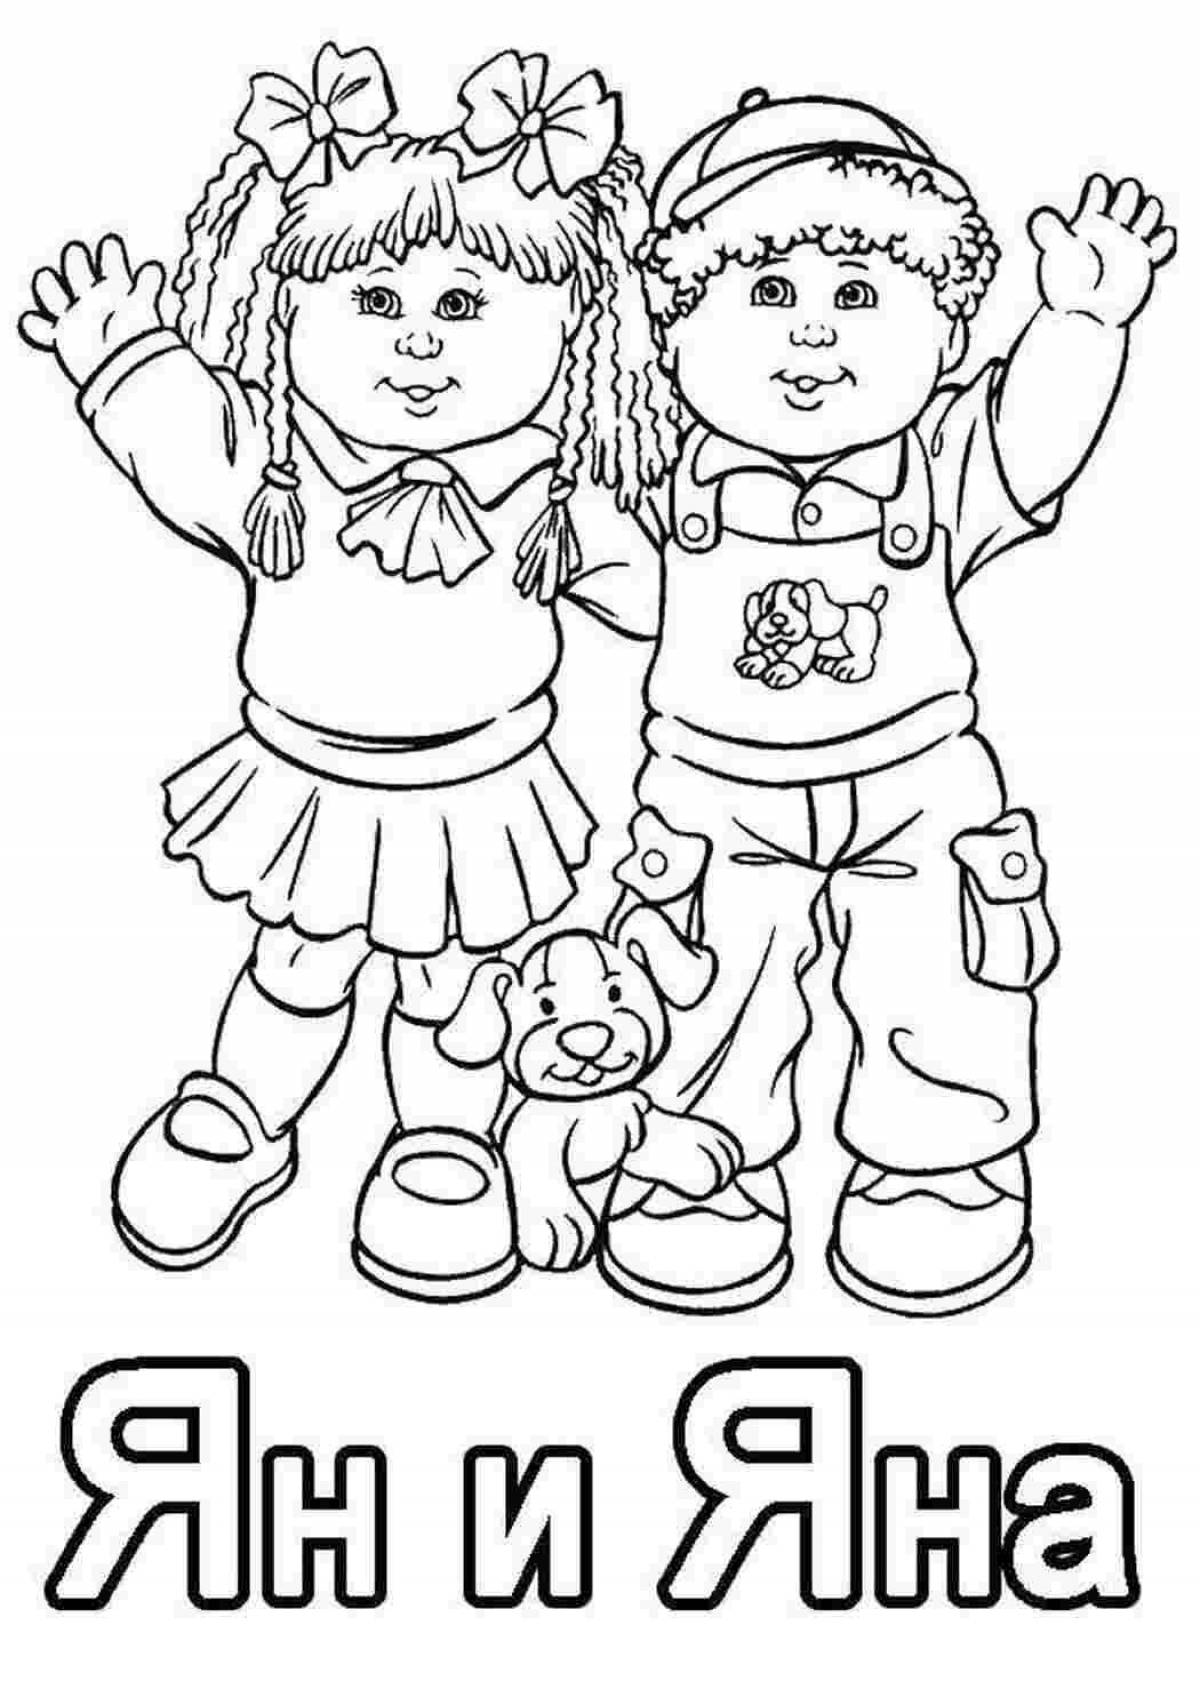 Color-explosion coloring page for children's rights